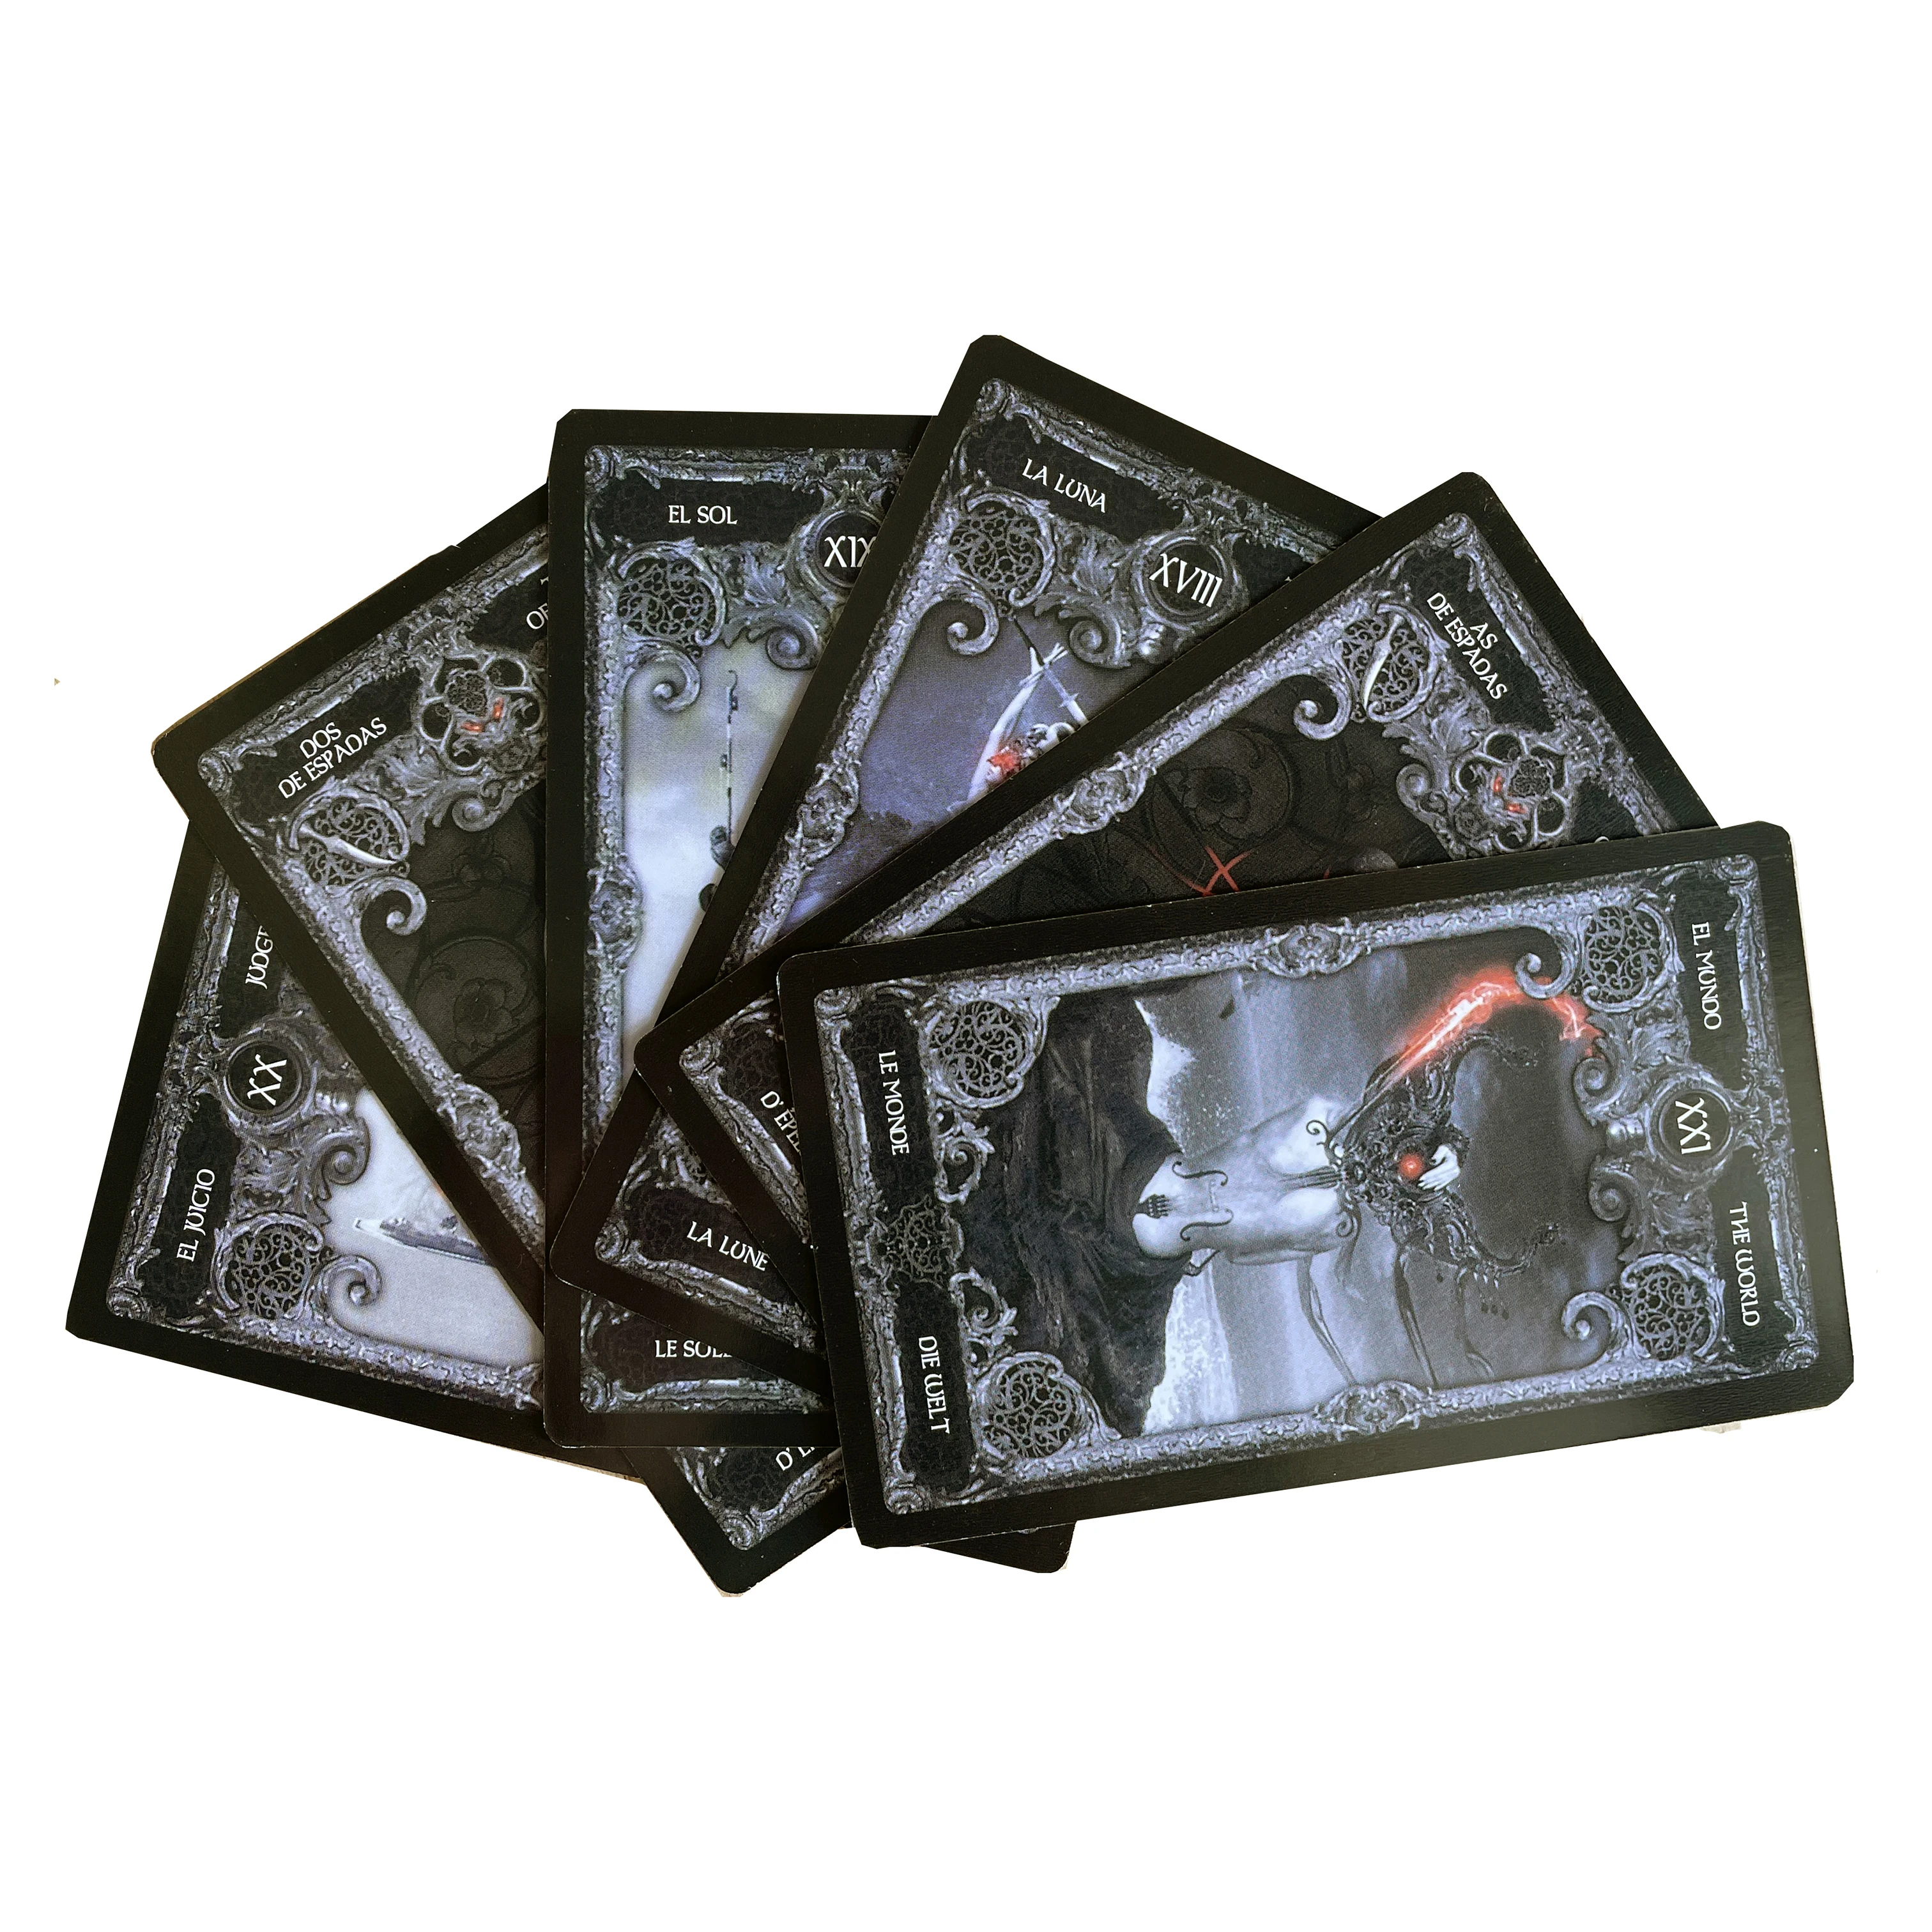 Dark tarot card deck for beginners , Unique tarot cards deck with guidebook , Full tarot decks 78 cards ,Beautiful oracle cards mini size game cards mystical lenormand oracle cards with english pdf guidebook indoor deck card game toys for child adult